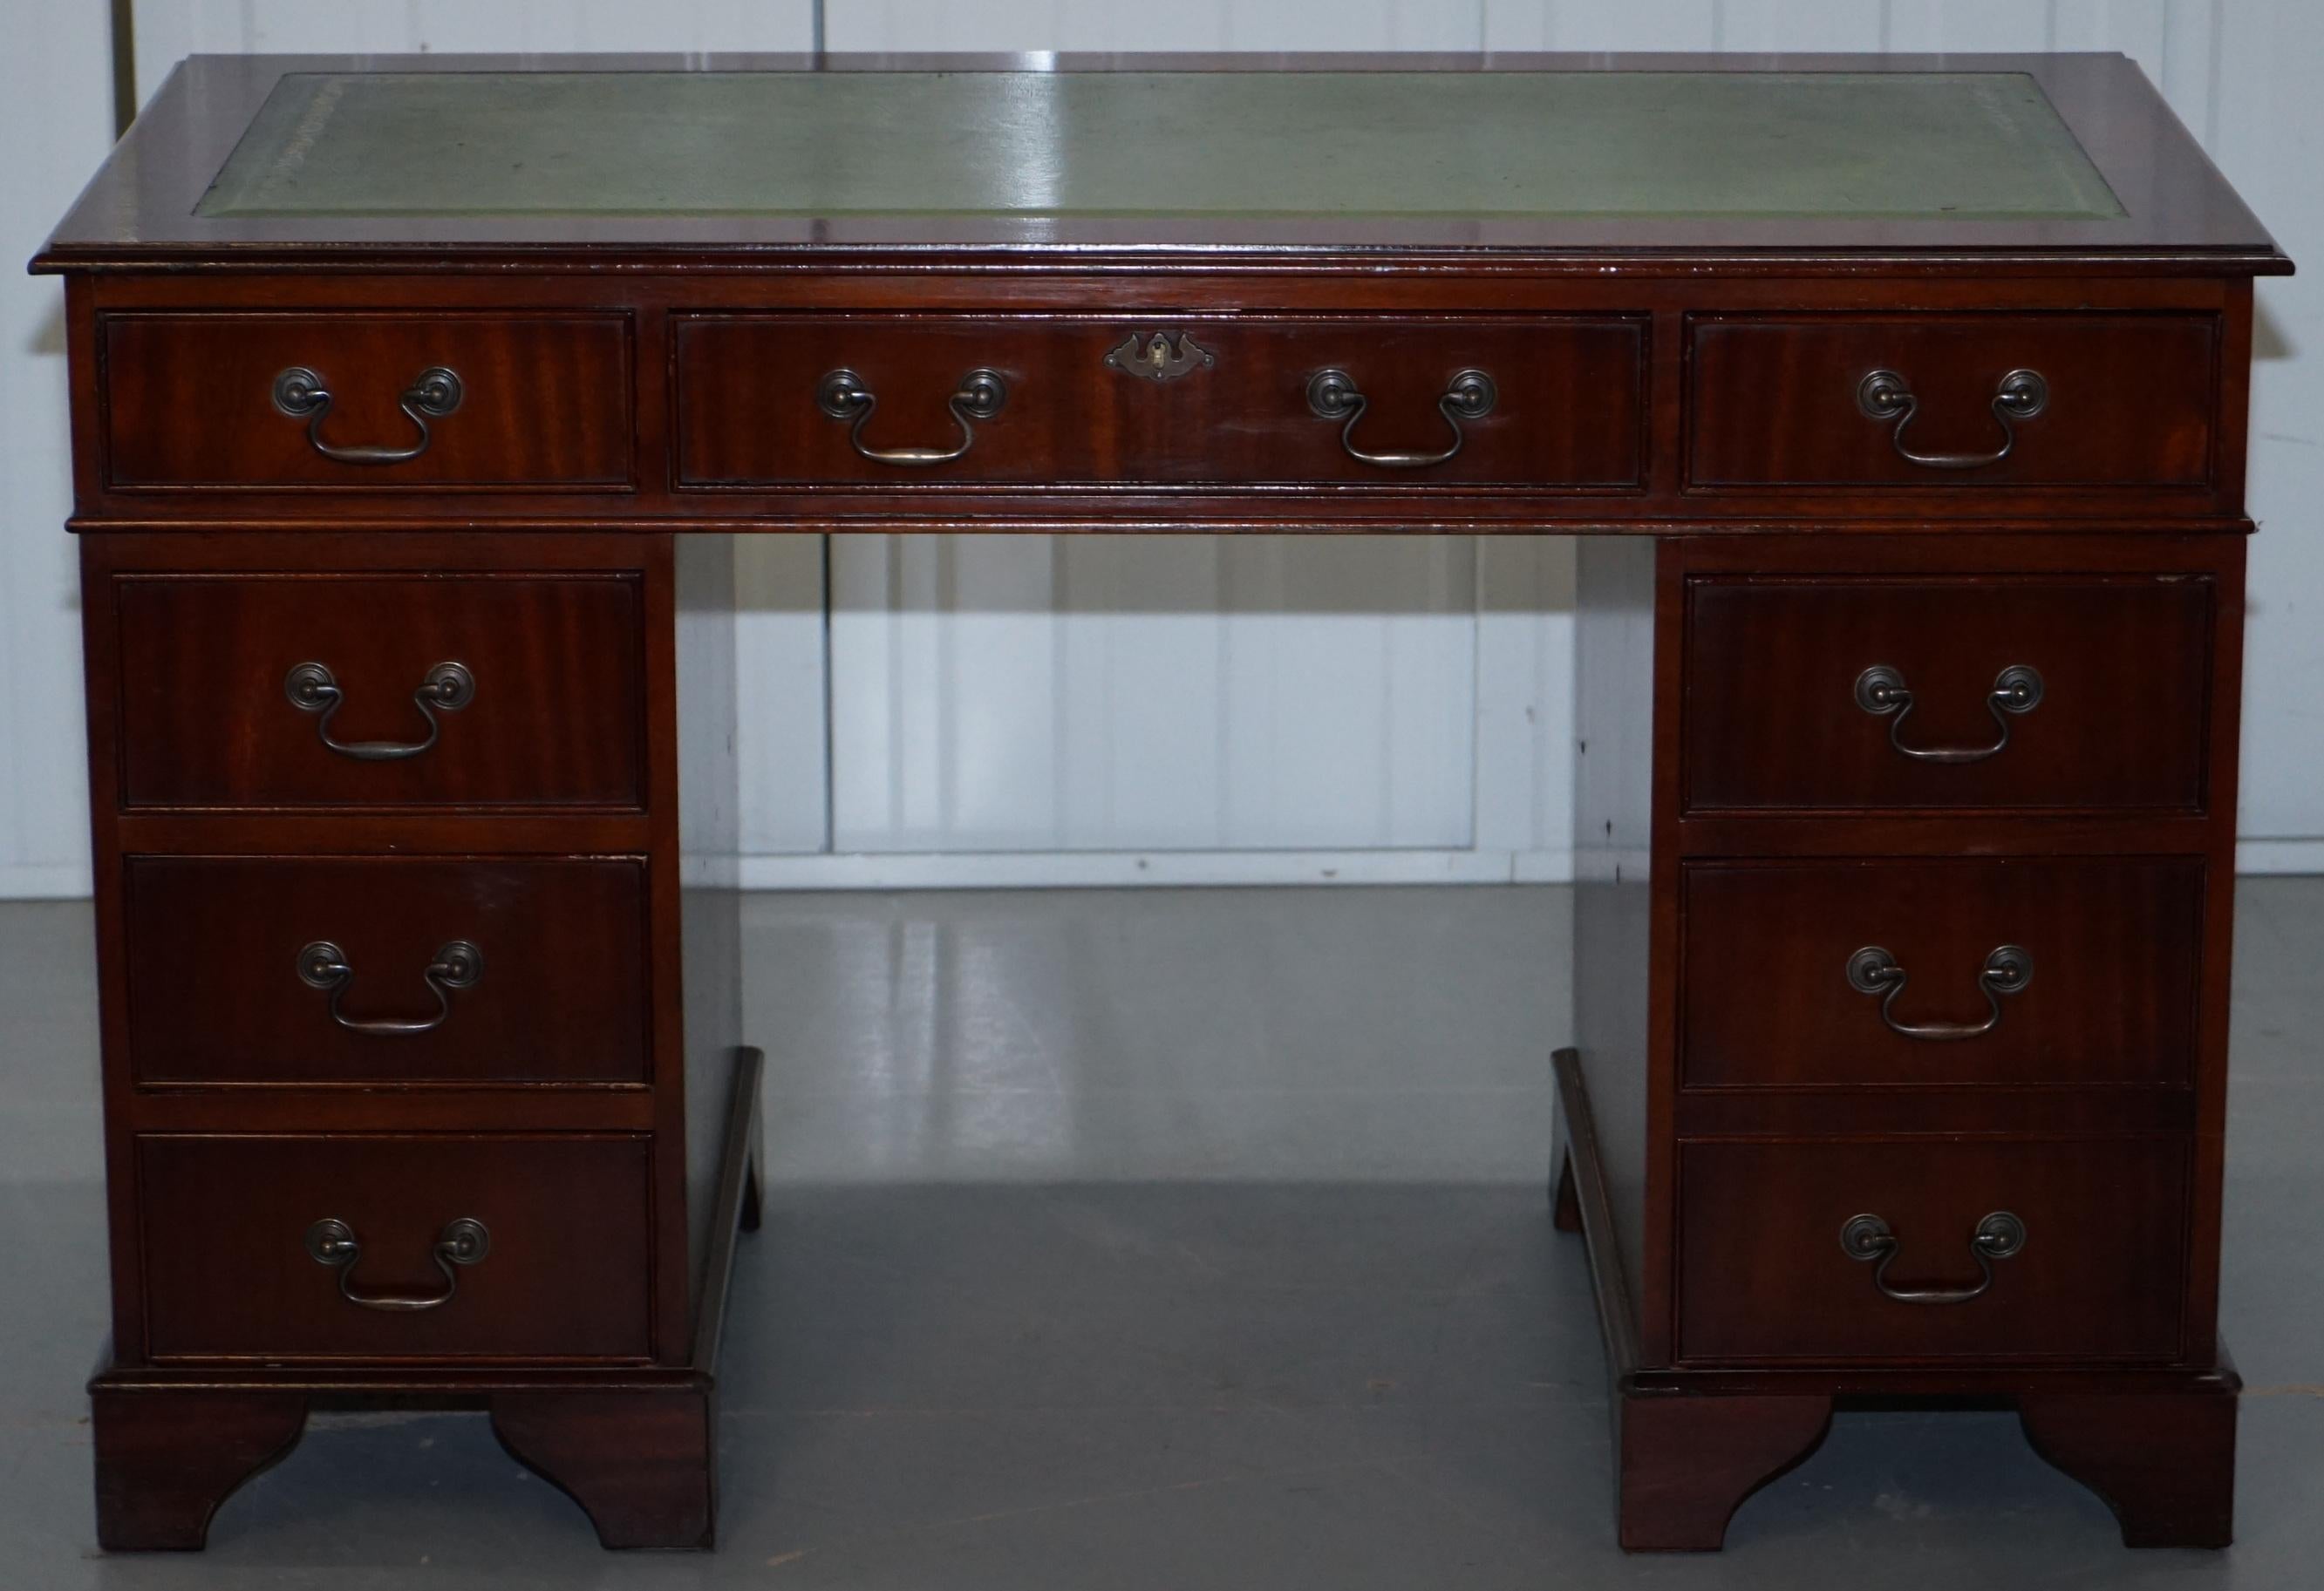 We are delighted to offer for sale this vintage twin pedestal partner desk finished in mahogany and with a green leather top

A very good looking and well made desk with a lovely timber patina, the desk splits into three easy to transport